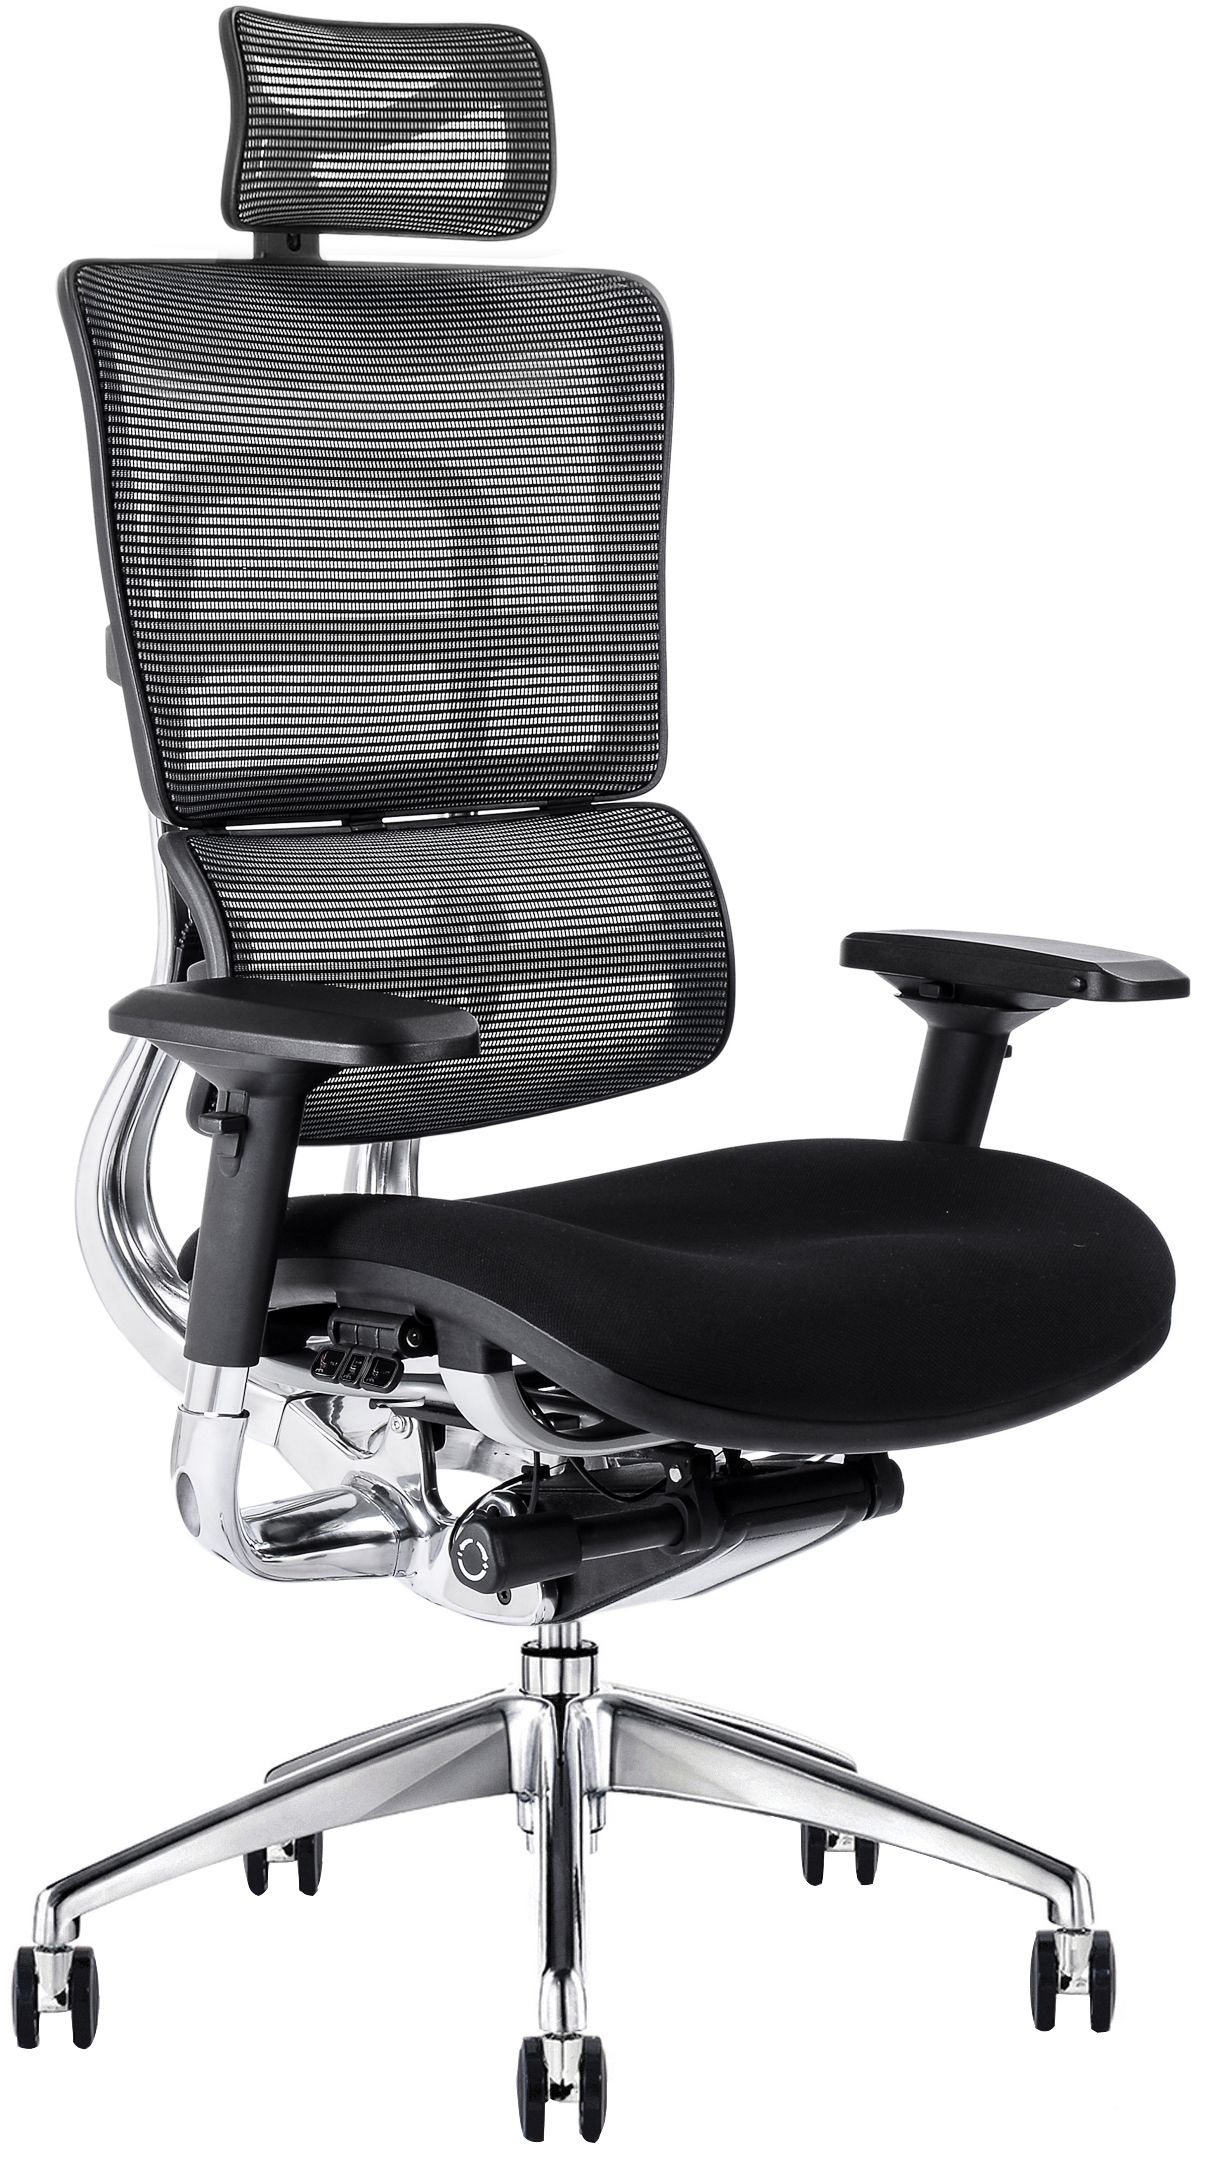 Fabric Office Chair With Headrest, Desire 24hr Ergonomic Mesh Office Chair With Headrest